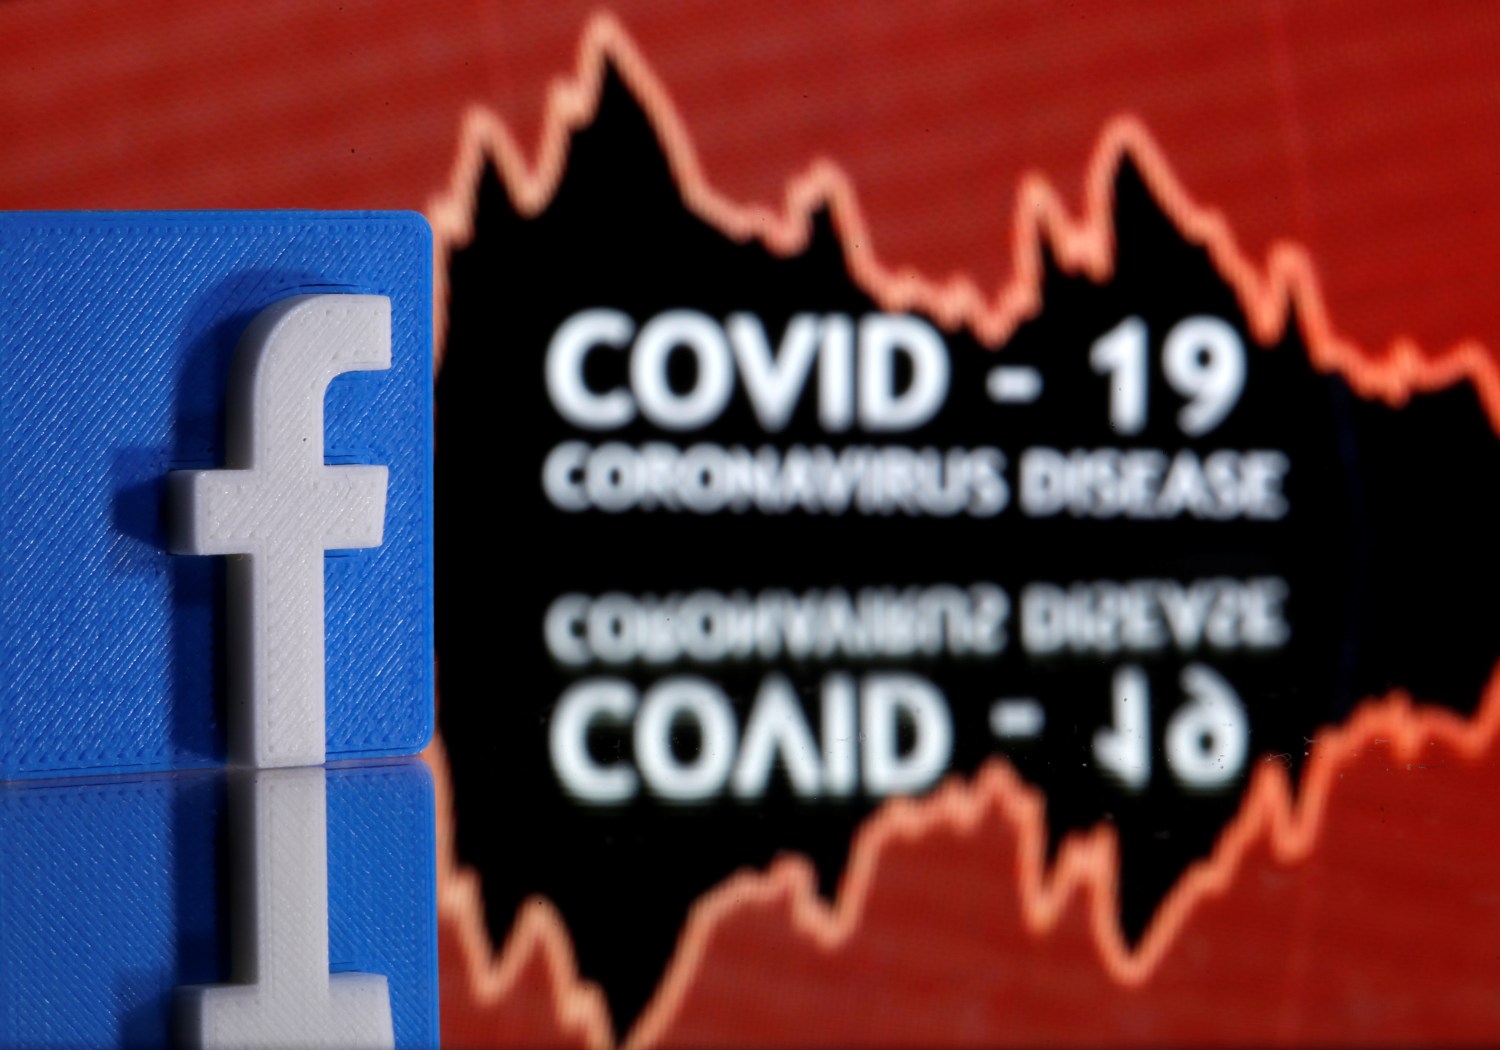 A 3D printed Facebook logo is seen in front of displayed coronavirus disease (COVID-19) words in this illustration taken March 24, 2020. Picture taken March 24, 2020. REUTERS/Dado Ruvic/Illustration